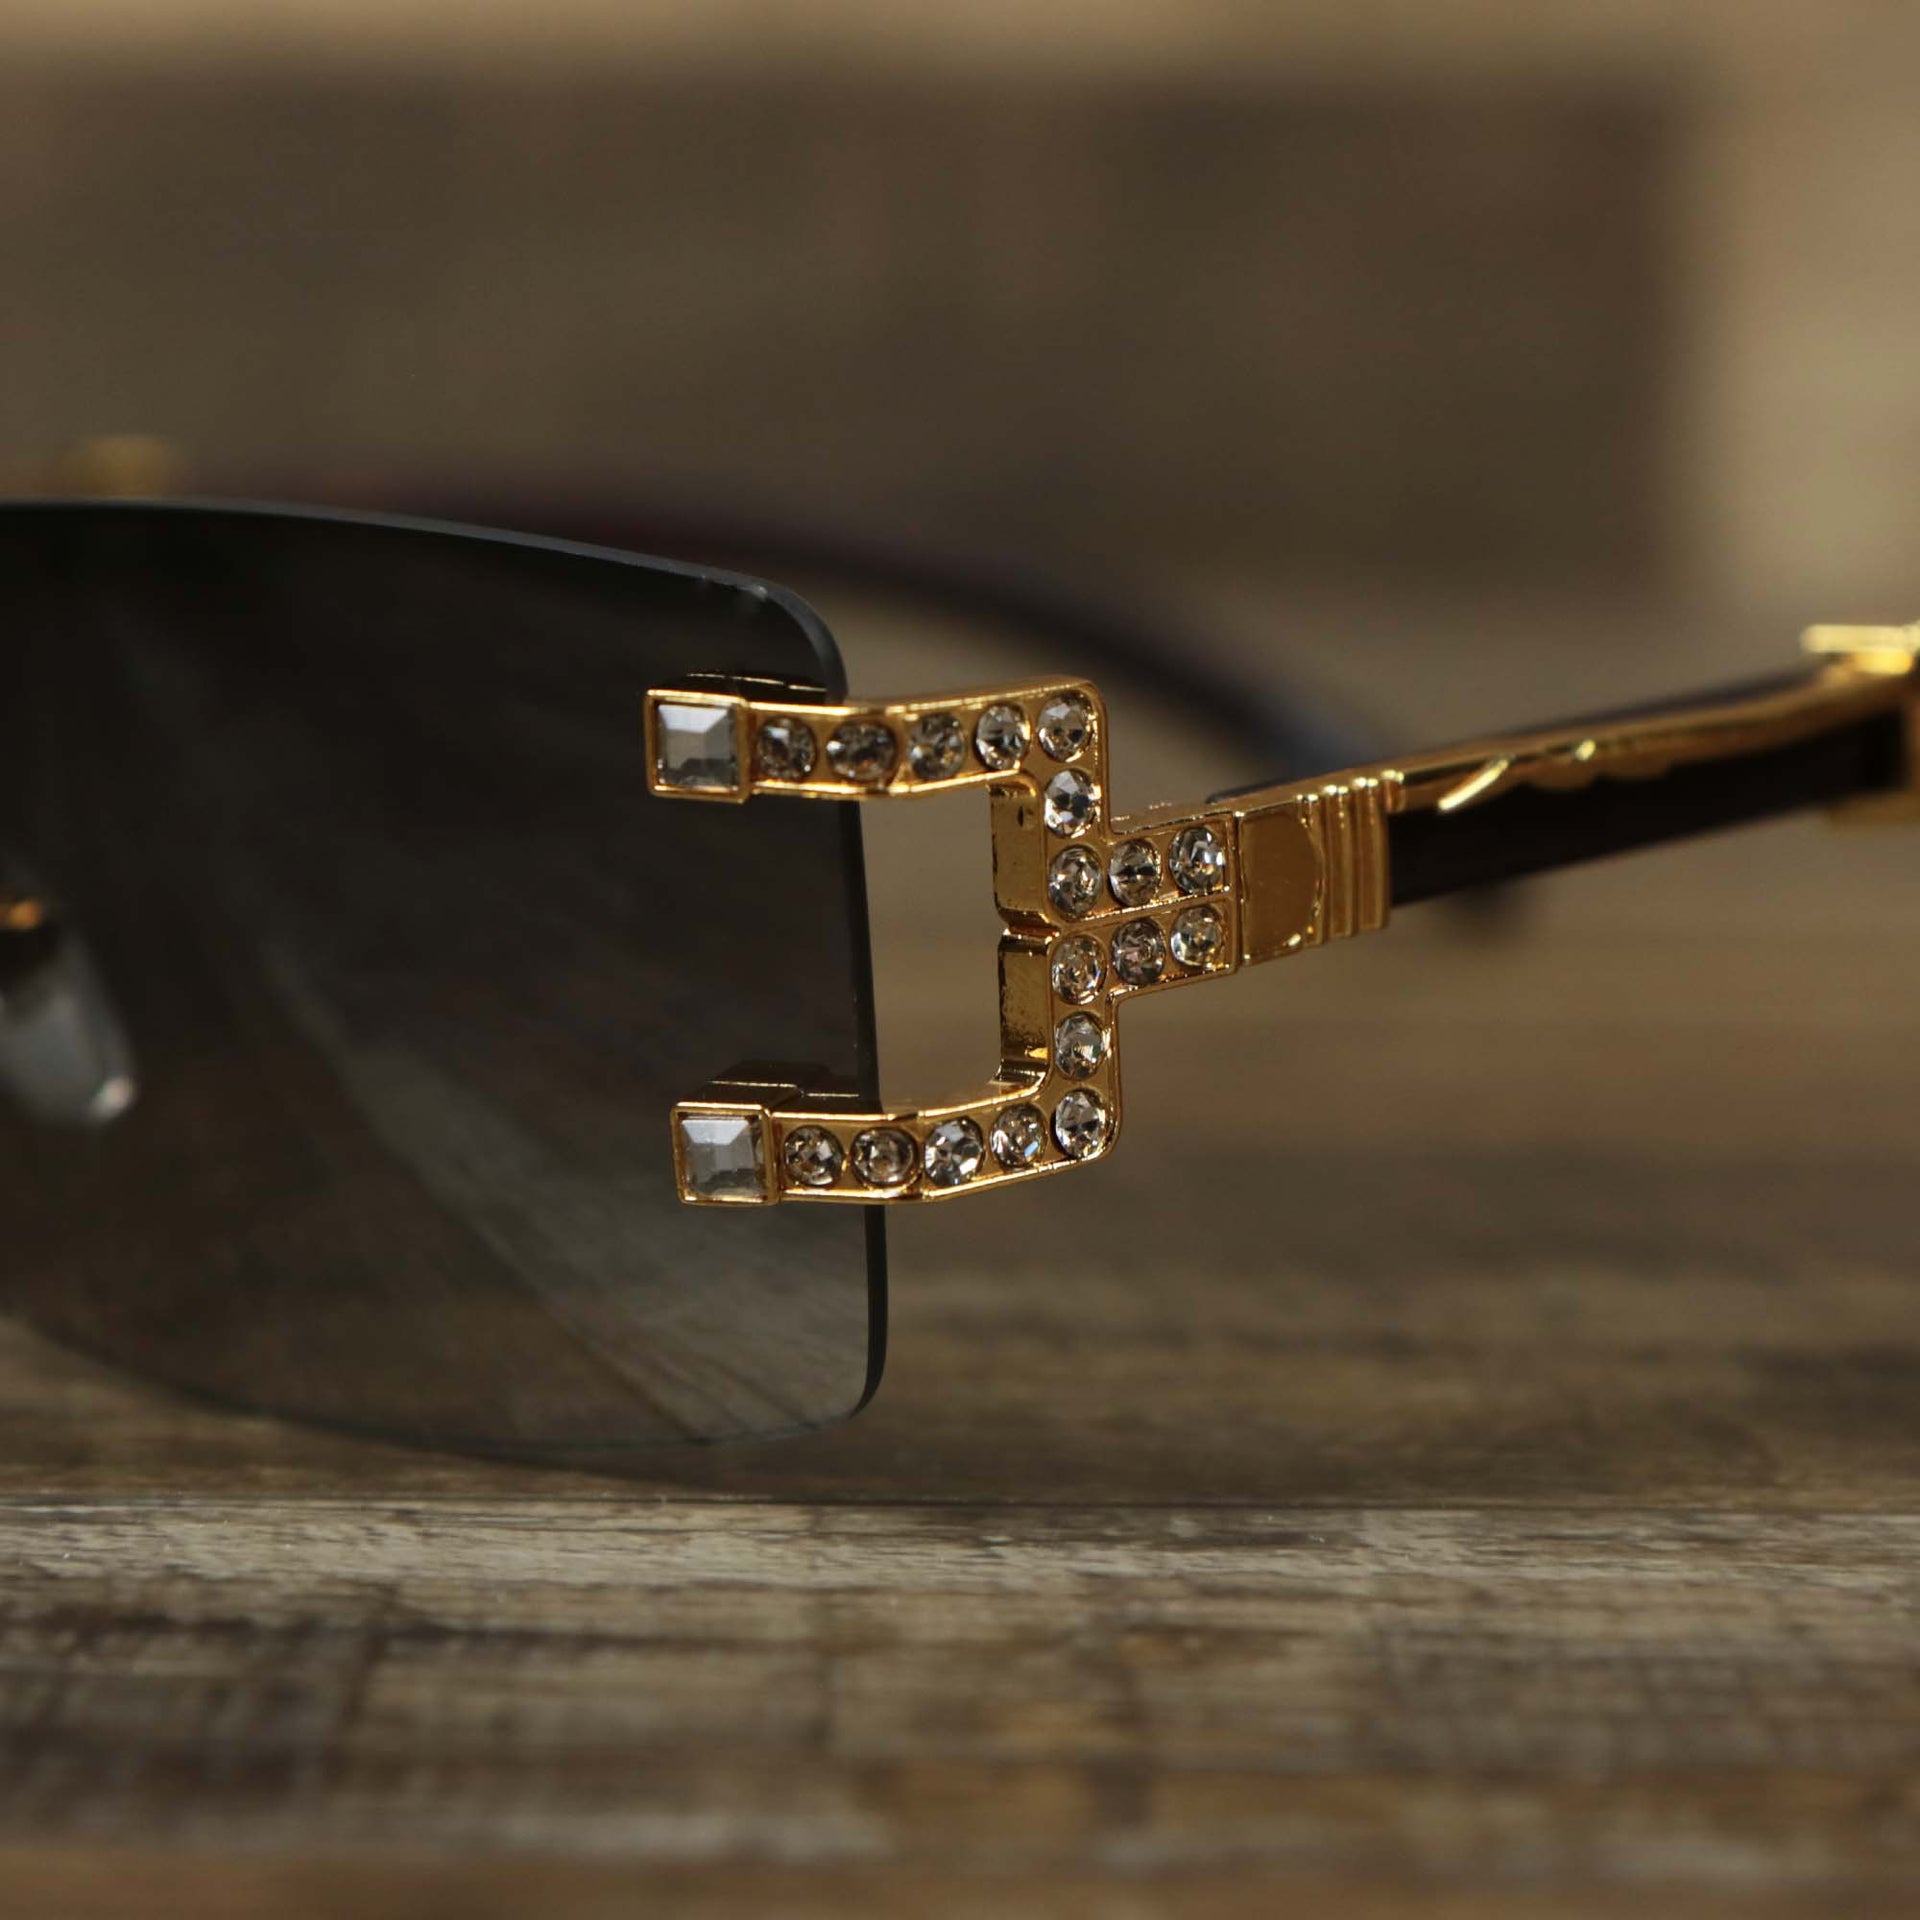 The hinge of the Rectangle Frames Black Gradient Lens Flooded Sunglasses with Gold Frame